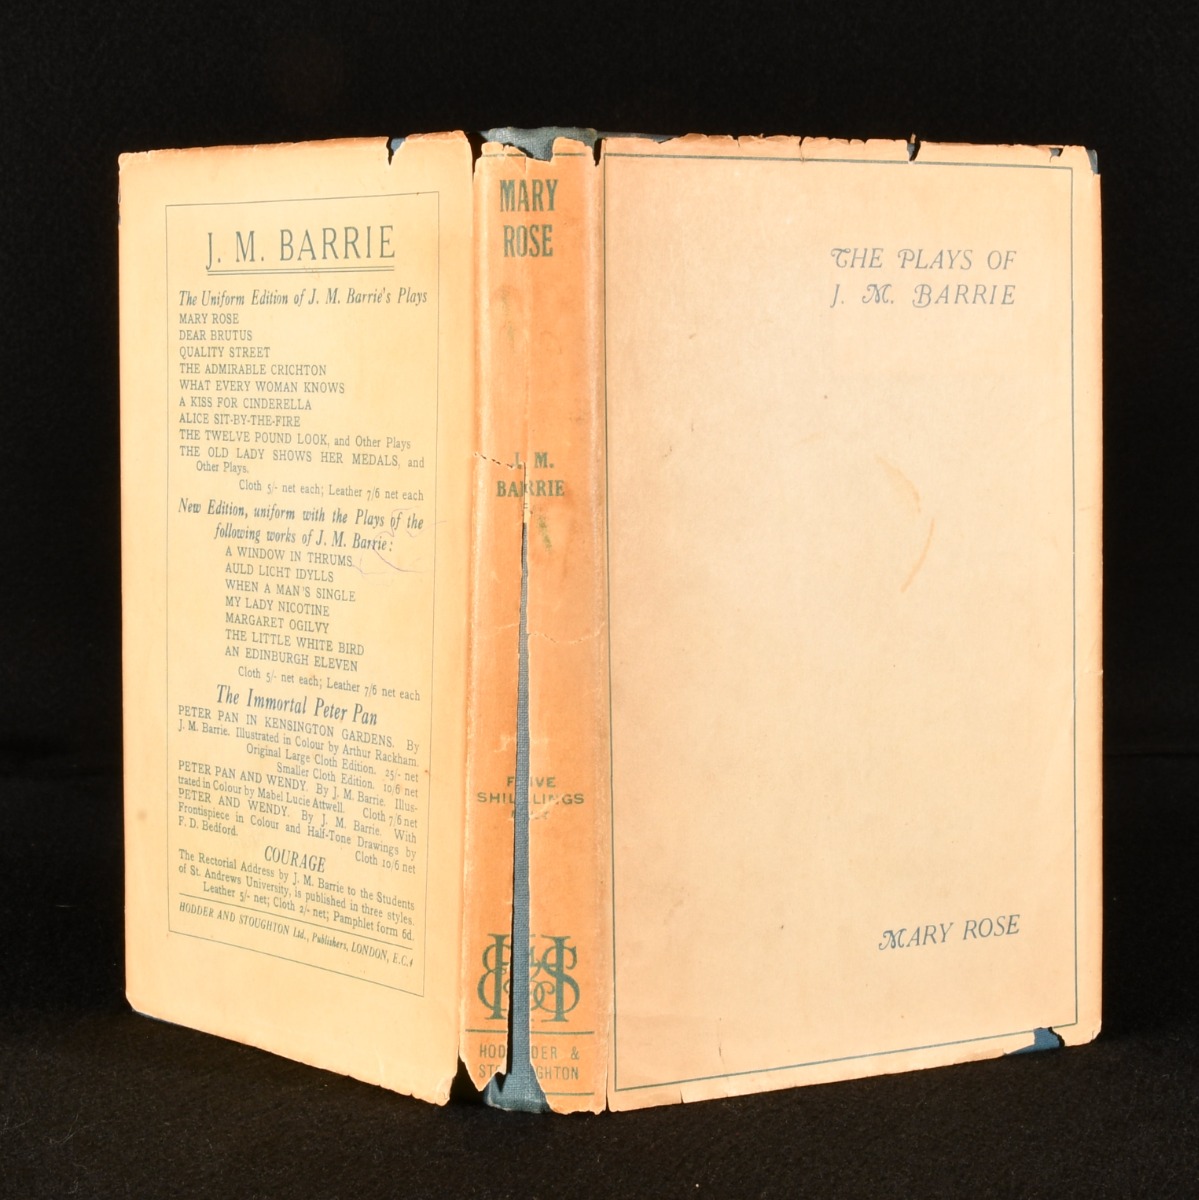 The Plays of J. M. Barrie Mary Rose par J. M. Barrie: Very Good Cloth ...